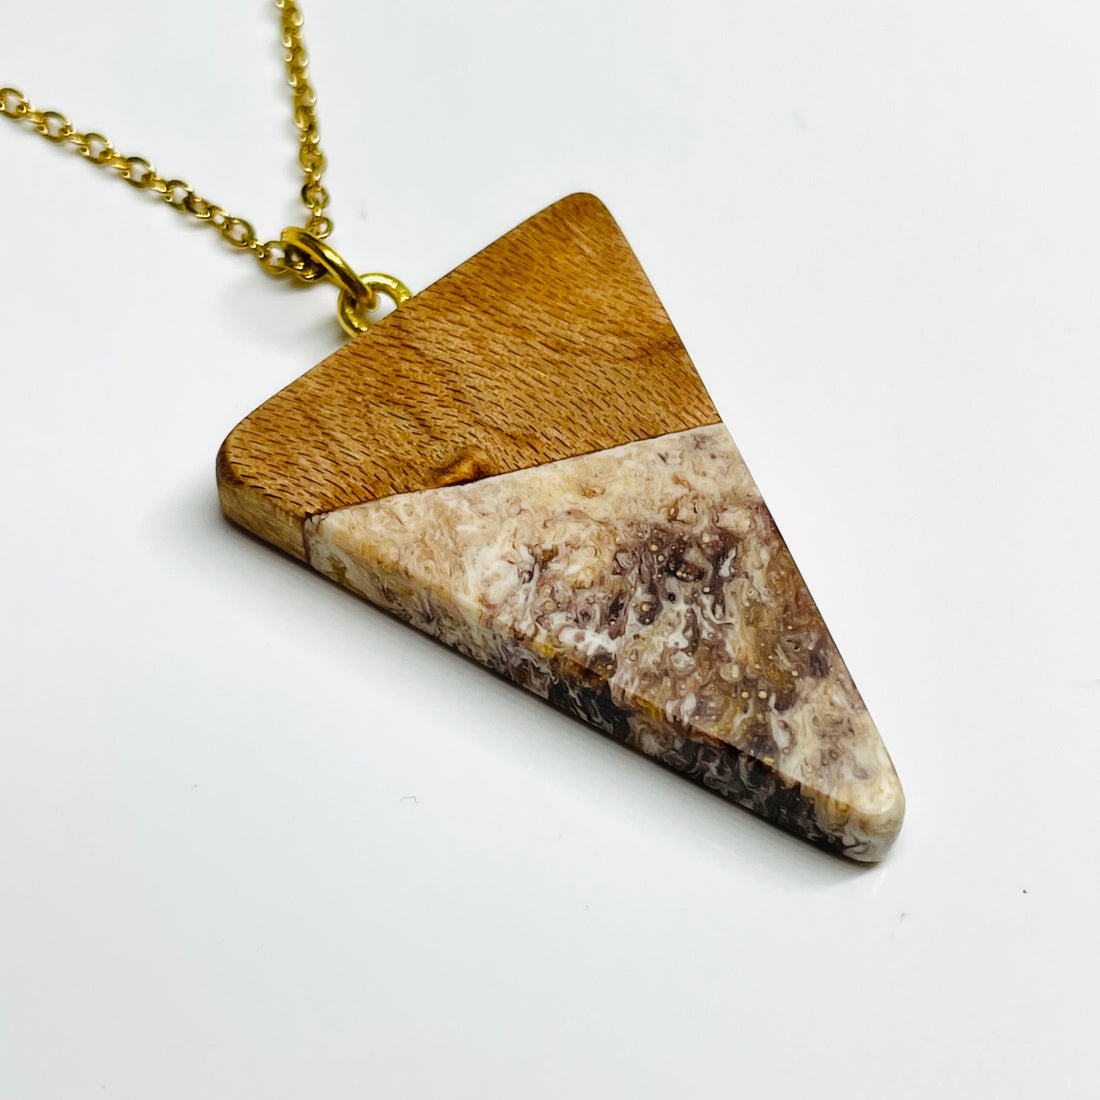 handmade jewelry, Minnesota local wood and resin artist. handmade birdseye maple wood with gold, bronze and white resin pendant necklace, 9" color colored stainless steel chain